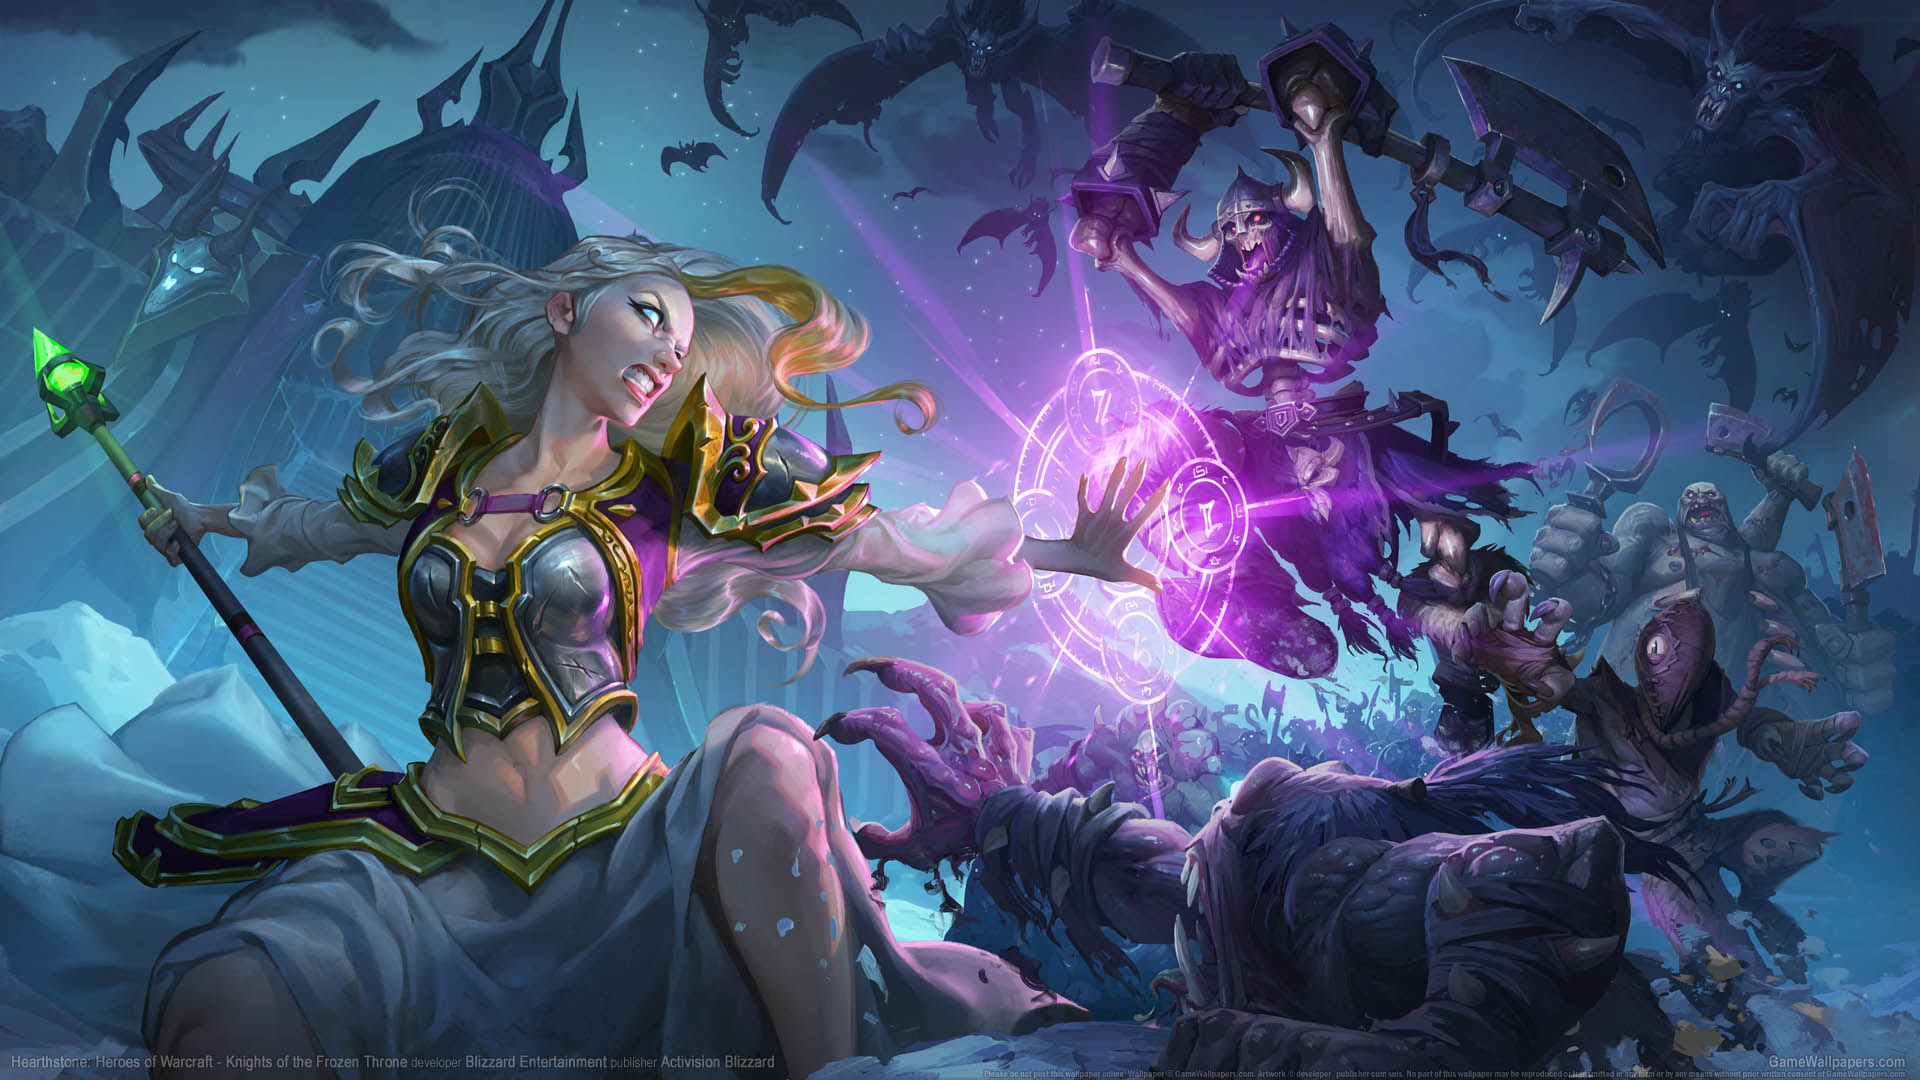 Hearthstone: Heroes of Warcraft - Knights of the Frozen Throne fond d'cran 01 1920x1080